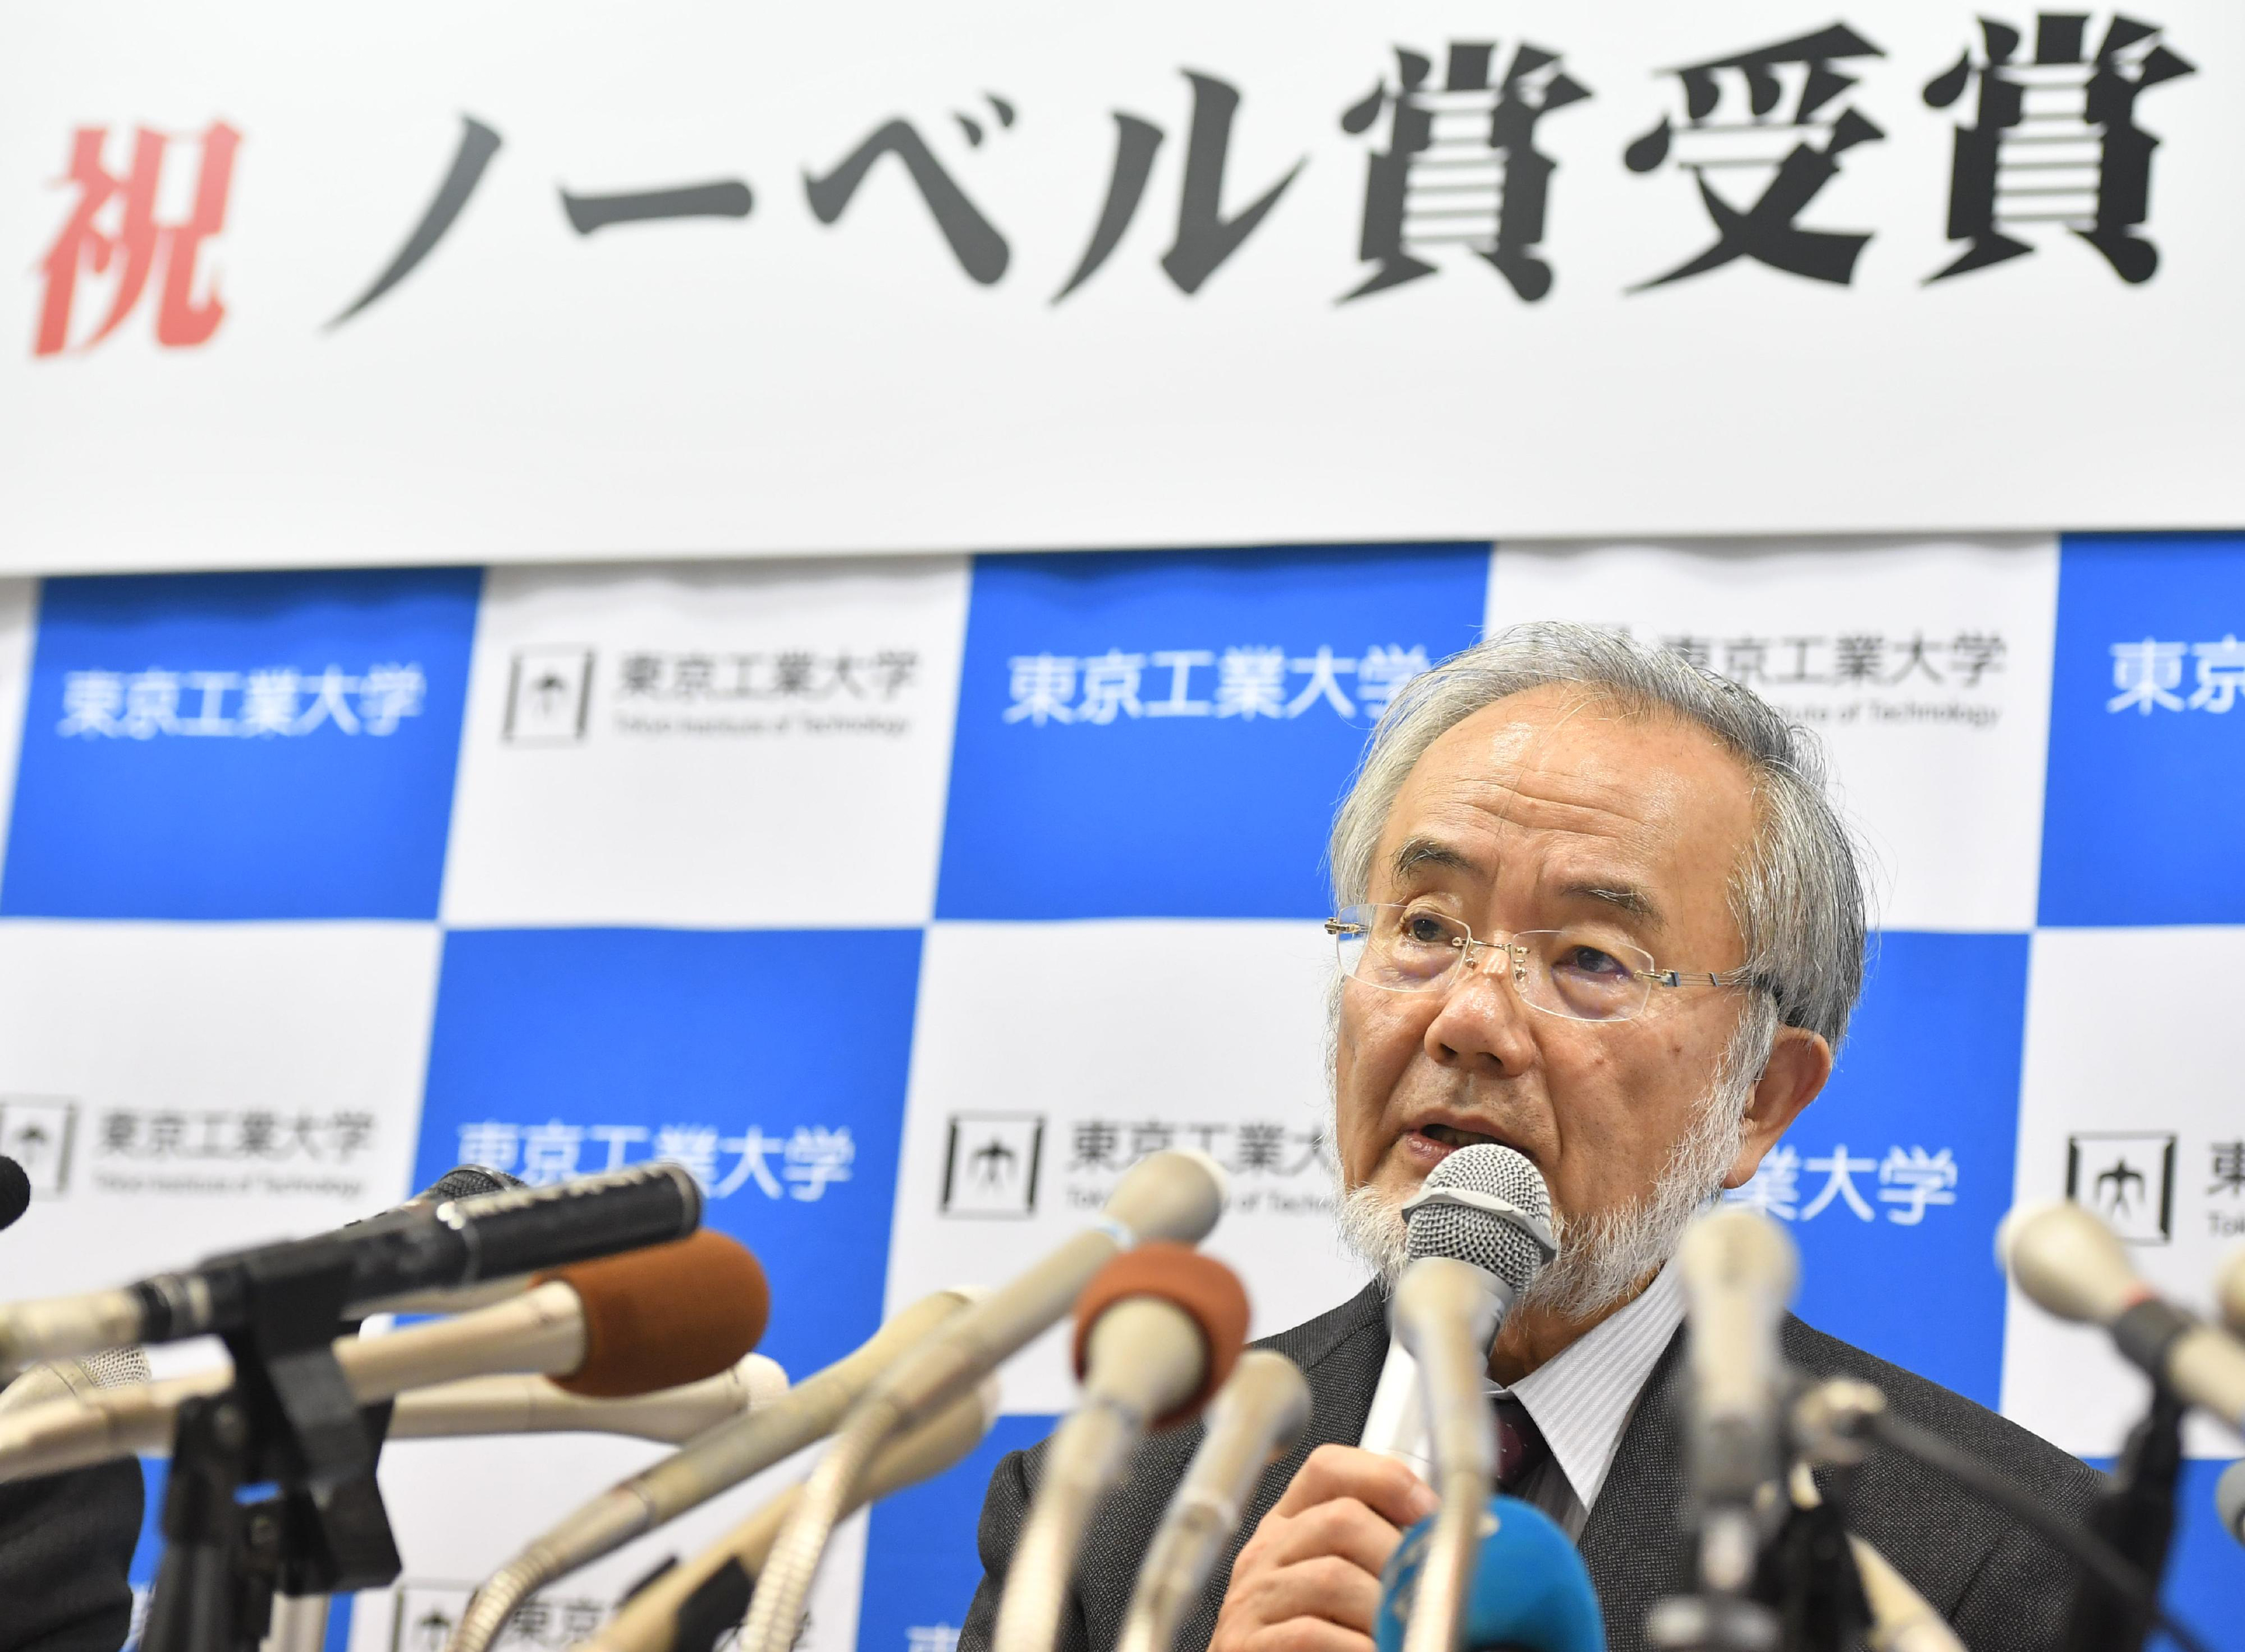 Japanese scientist Ohsumi wins Nobel Prize in Physiology or Medicine